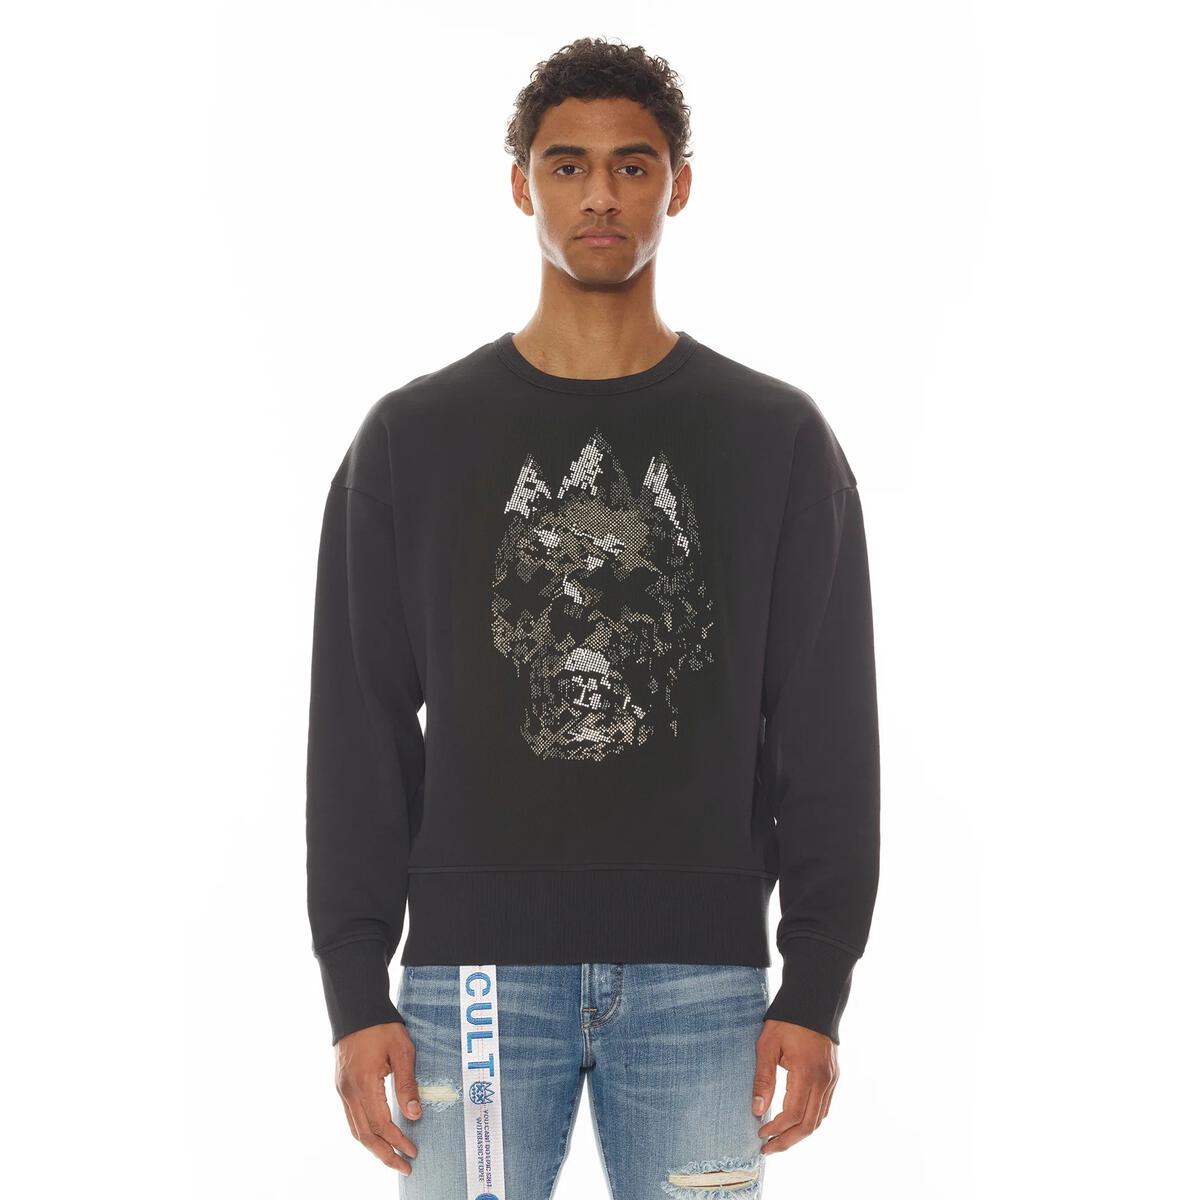 CULT OF INDIVIDUALITY FRENCH TERRY CREW NEC SWEATSHIRT "CRYSTAL SKULL"